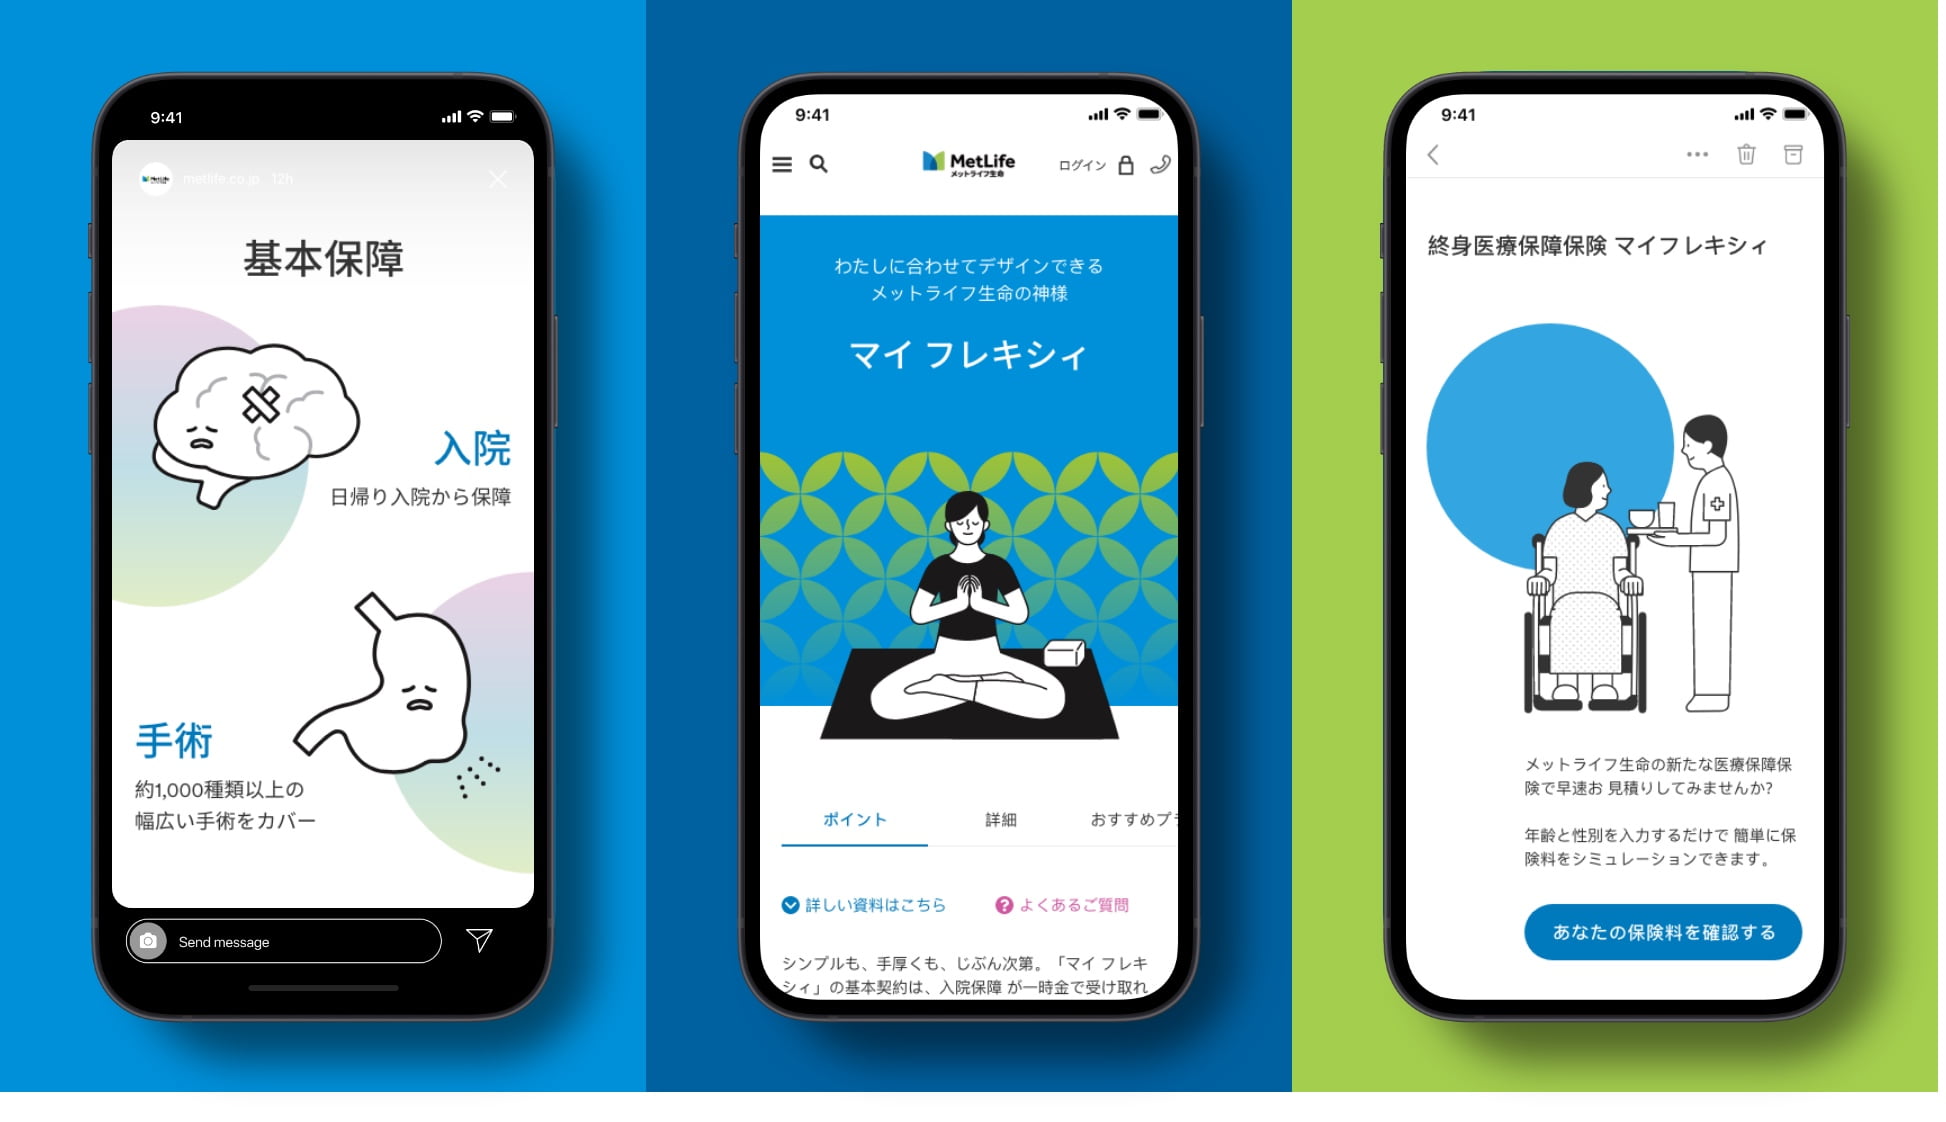 Three phone screens showing use of illustration in digital work from Japan.